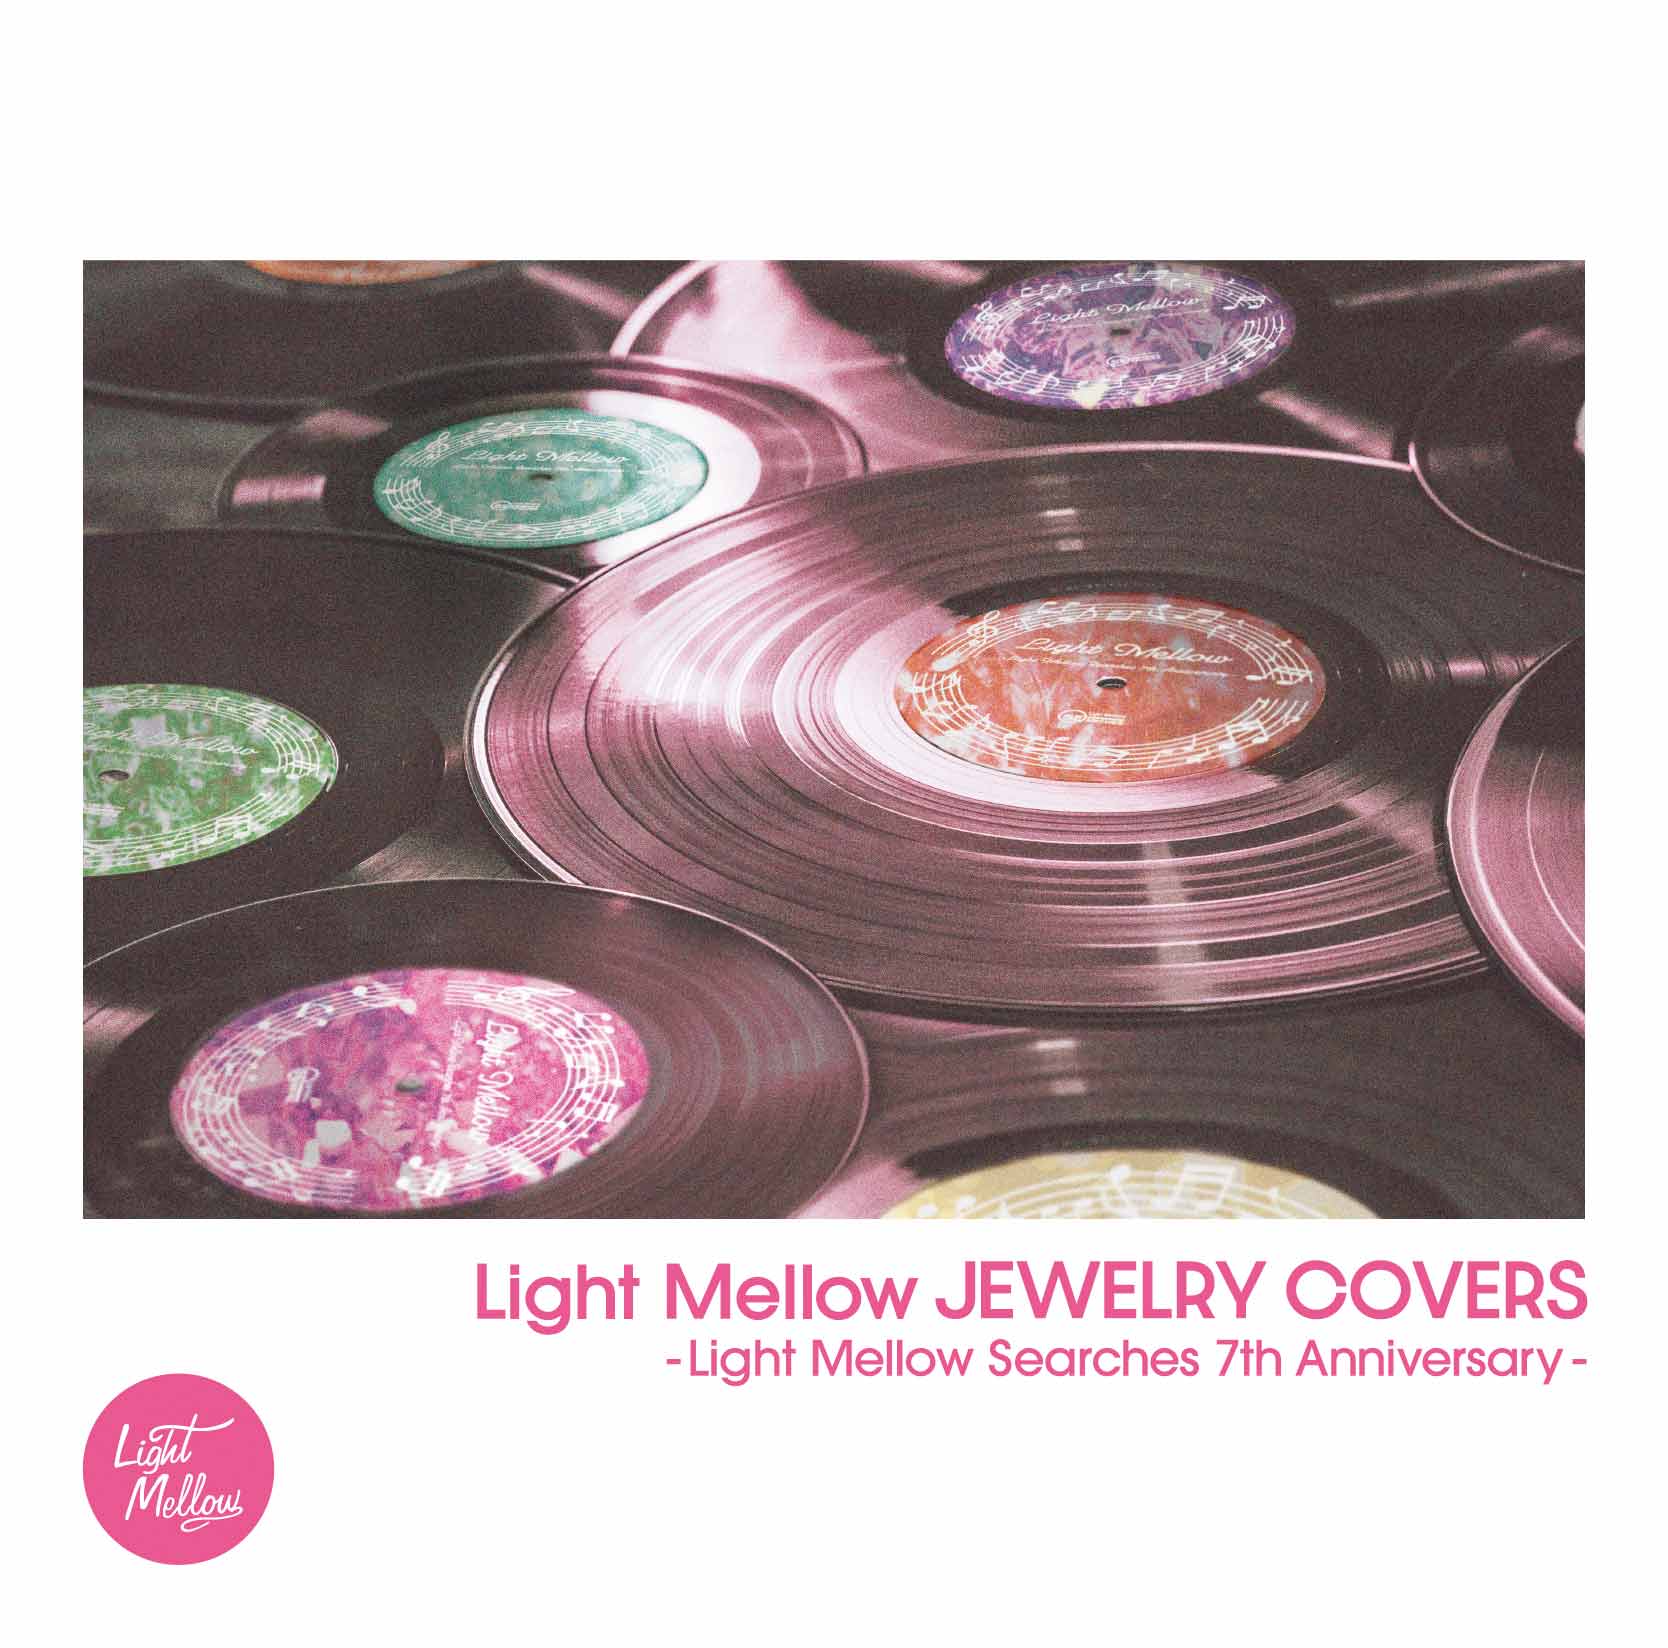 V.A.「Light Mellow JEWELRY COVERS - Light Mellow Searches 7th Anniversary -」